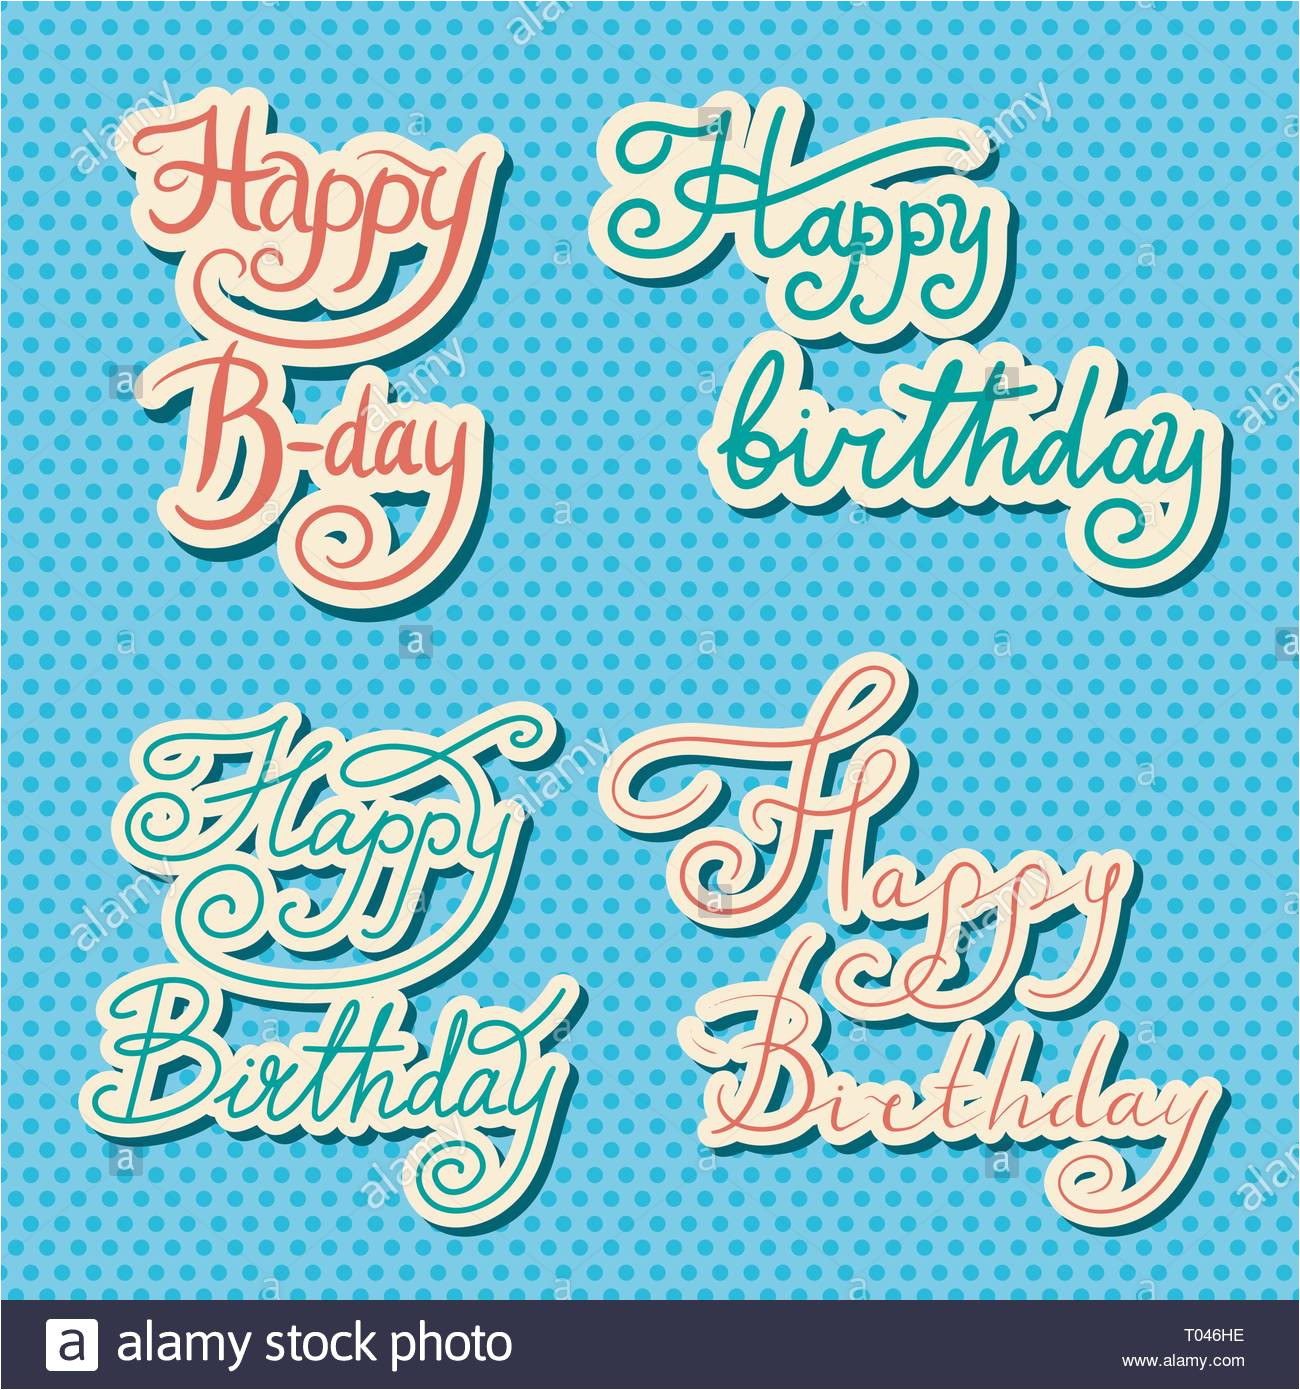 happy birthday text hand drawn lettering collection of grunge elements typography brush set of illustration for banner poster and greeting card t046he jpg